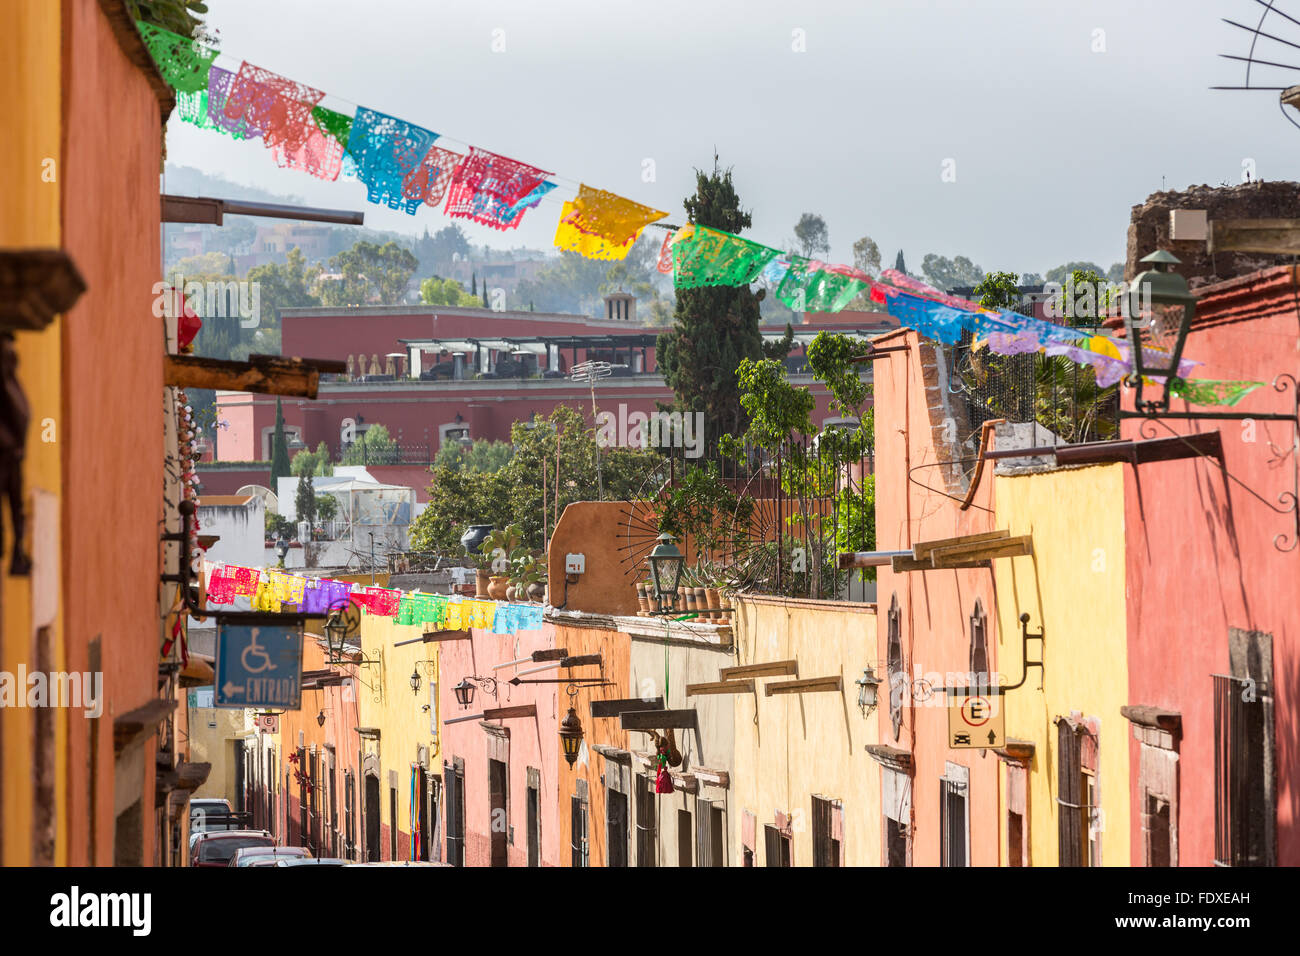 Papel picado banners decorate a street in the historic center of San Miguel de Allende, Mexico. Stock Photo